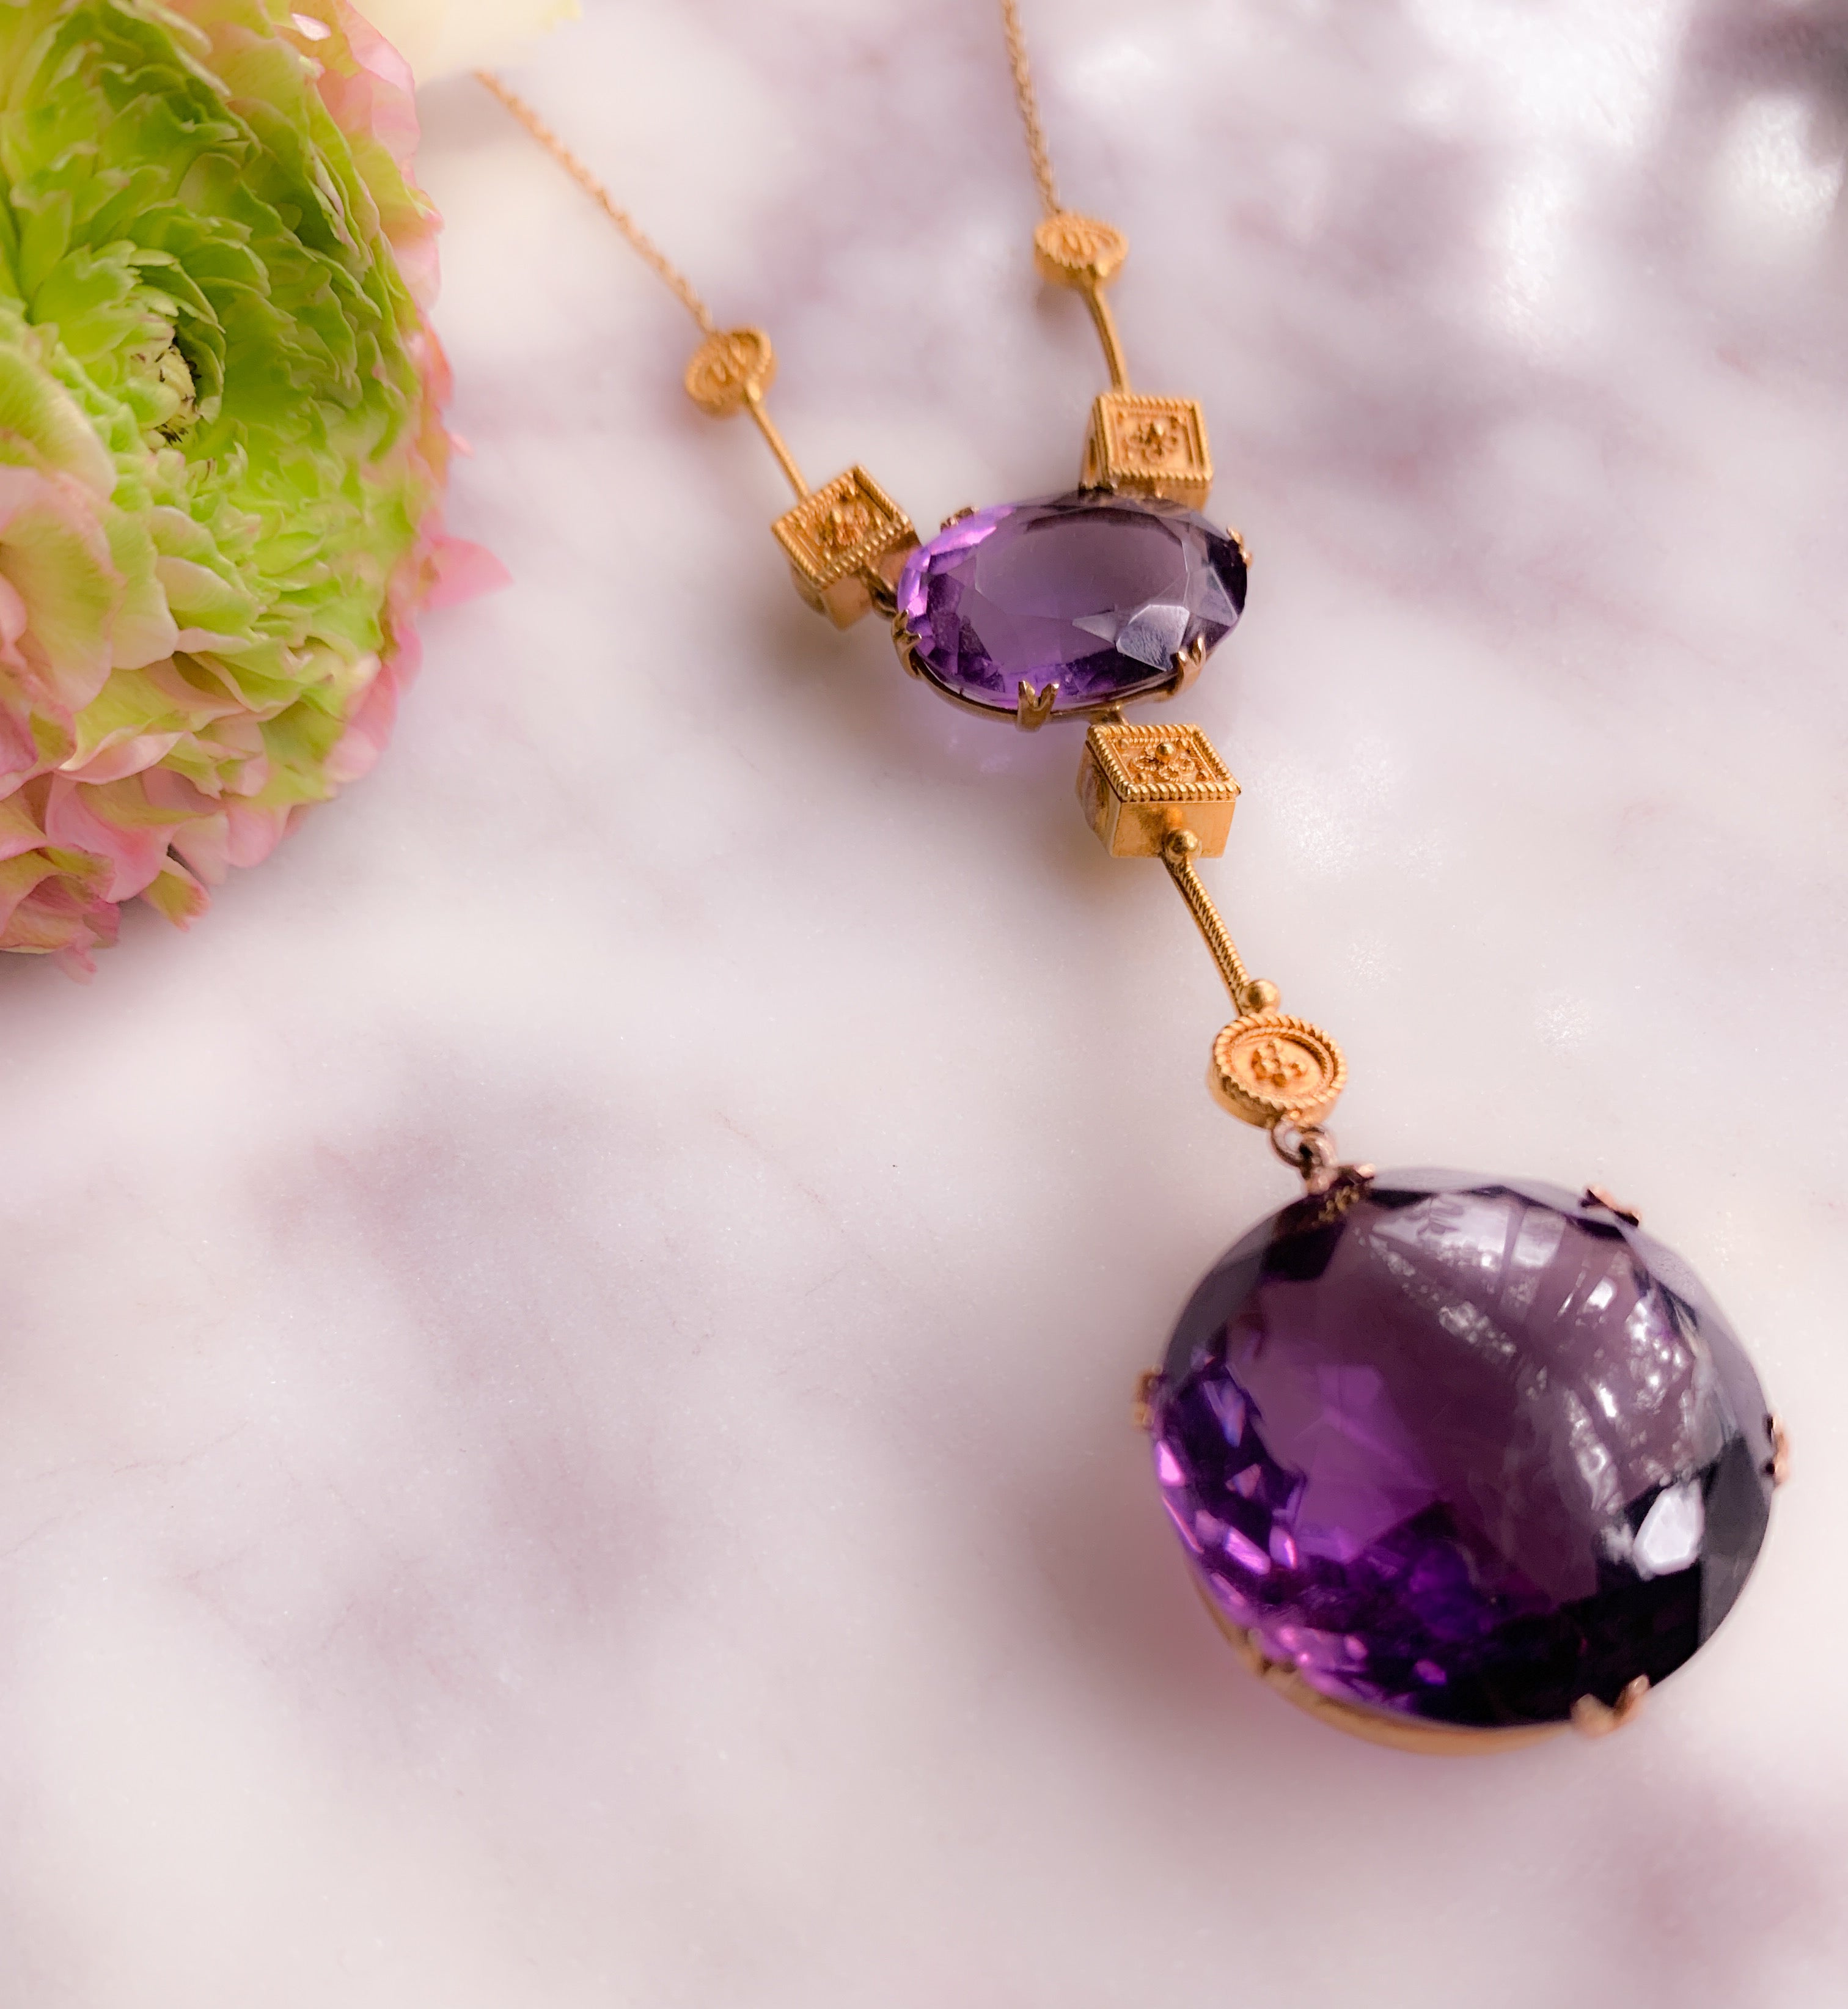 Outstanding Amethyst Necklace in 15k Circa 1879 *include ribbon*